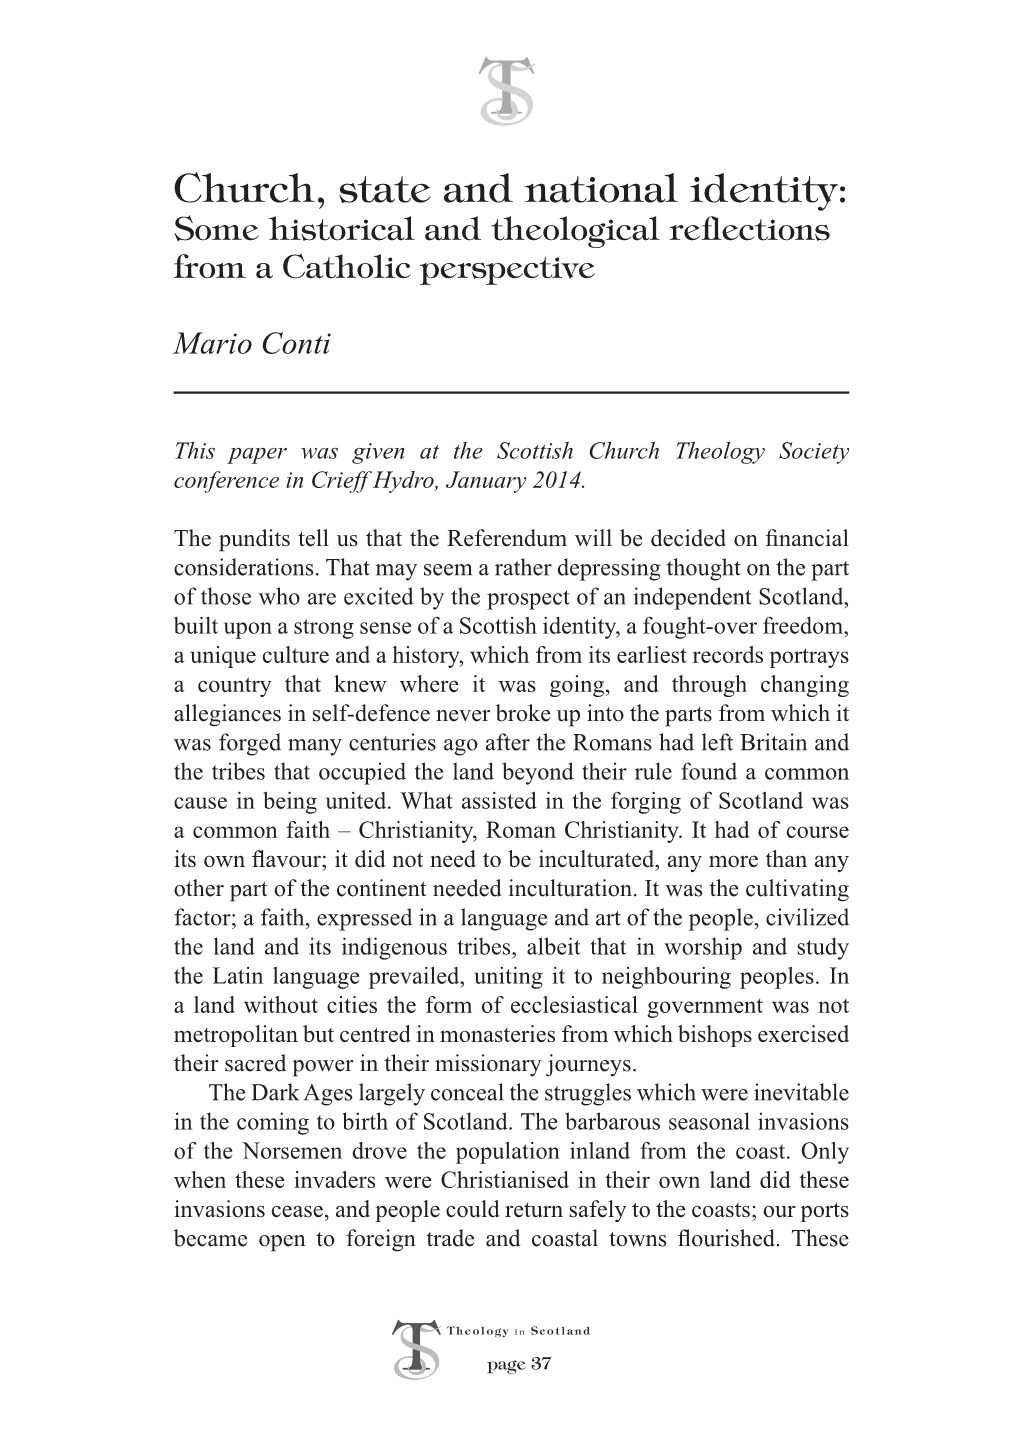 Church, State and National Identity: Some Historical and Theological Reflections from a Catholic Perspective